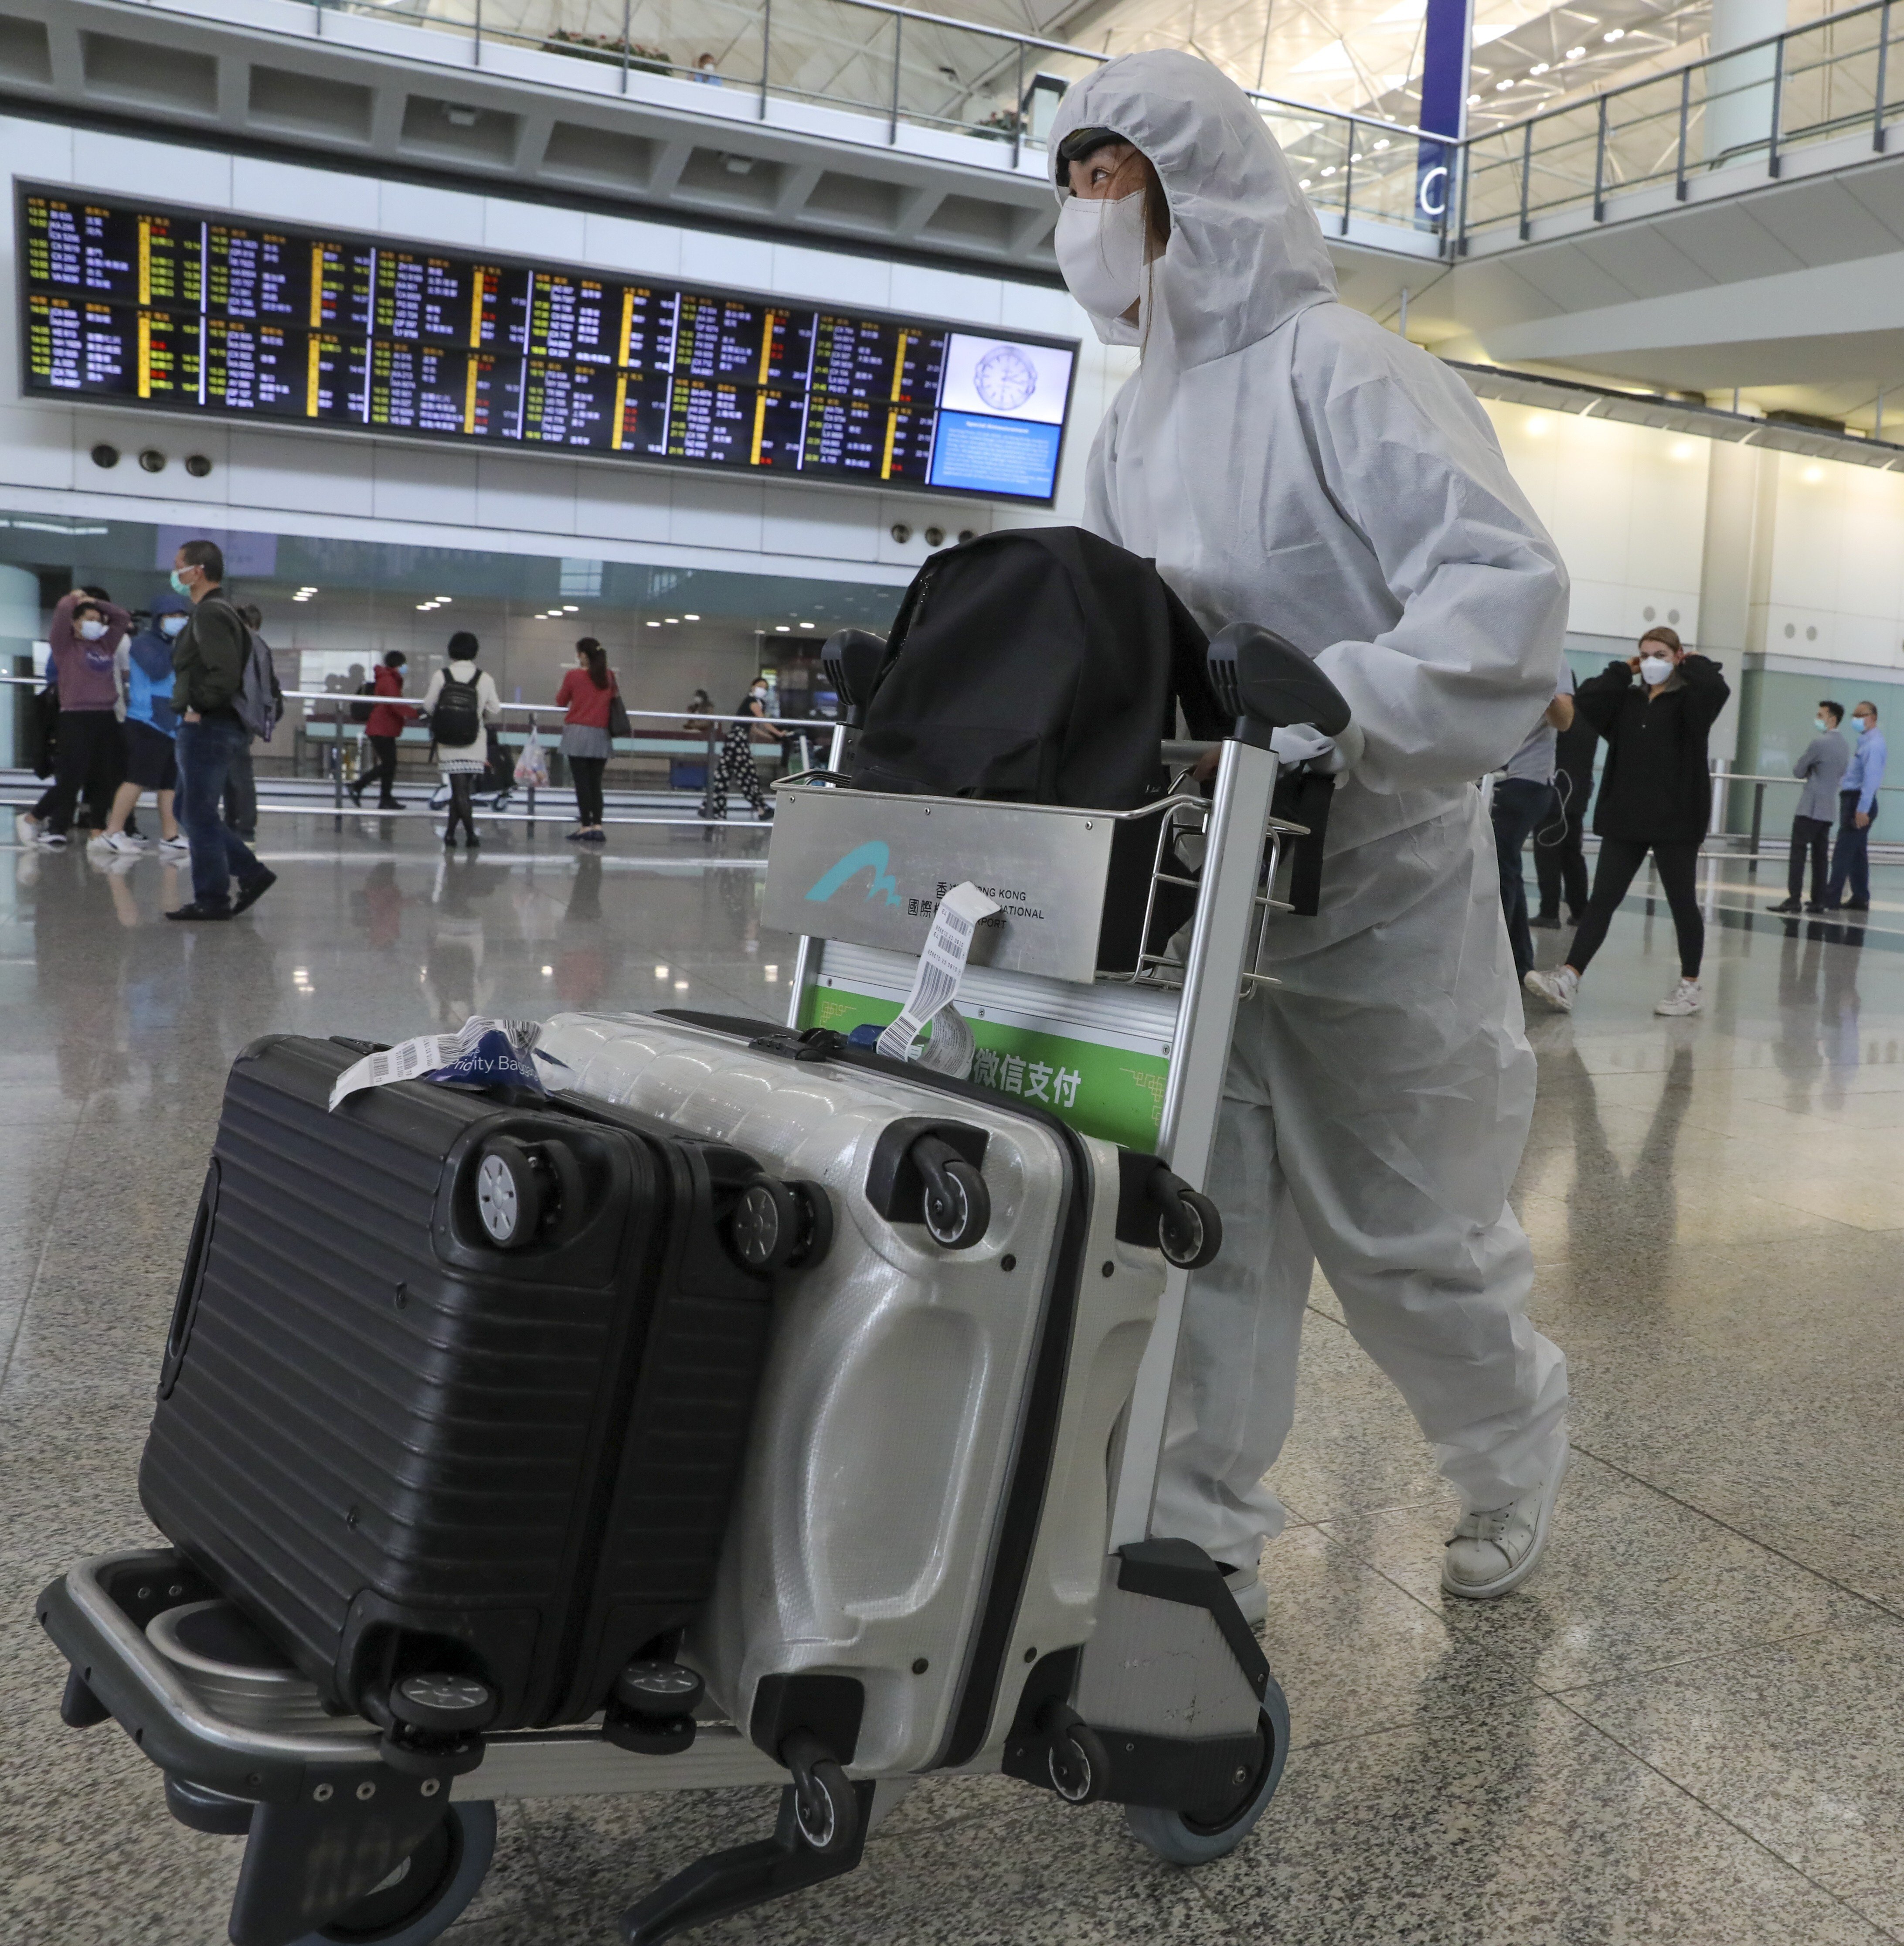 University student Amy Chan walks through Hong Kong International Airport on March 16 after returning from her studies in the United Kingdom amid the Covid-19 pandemic. Photo: K.Y. Cheng